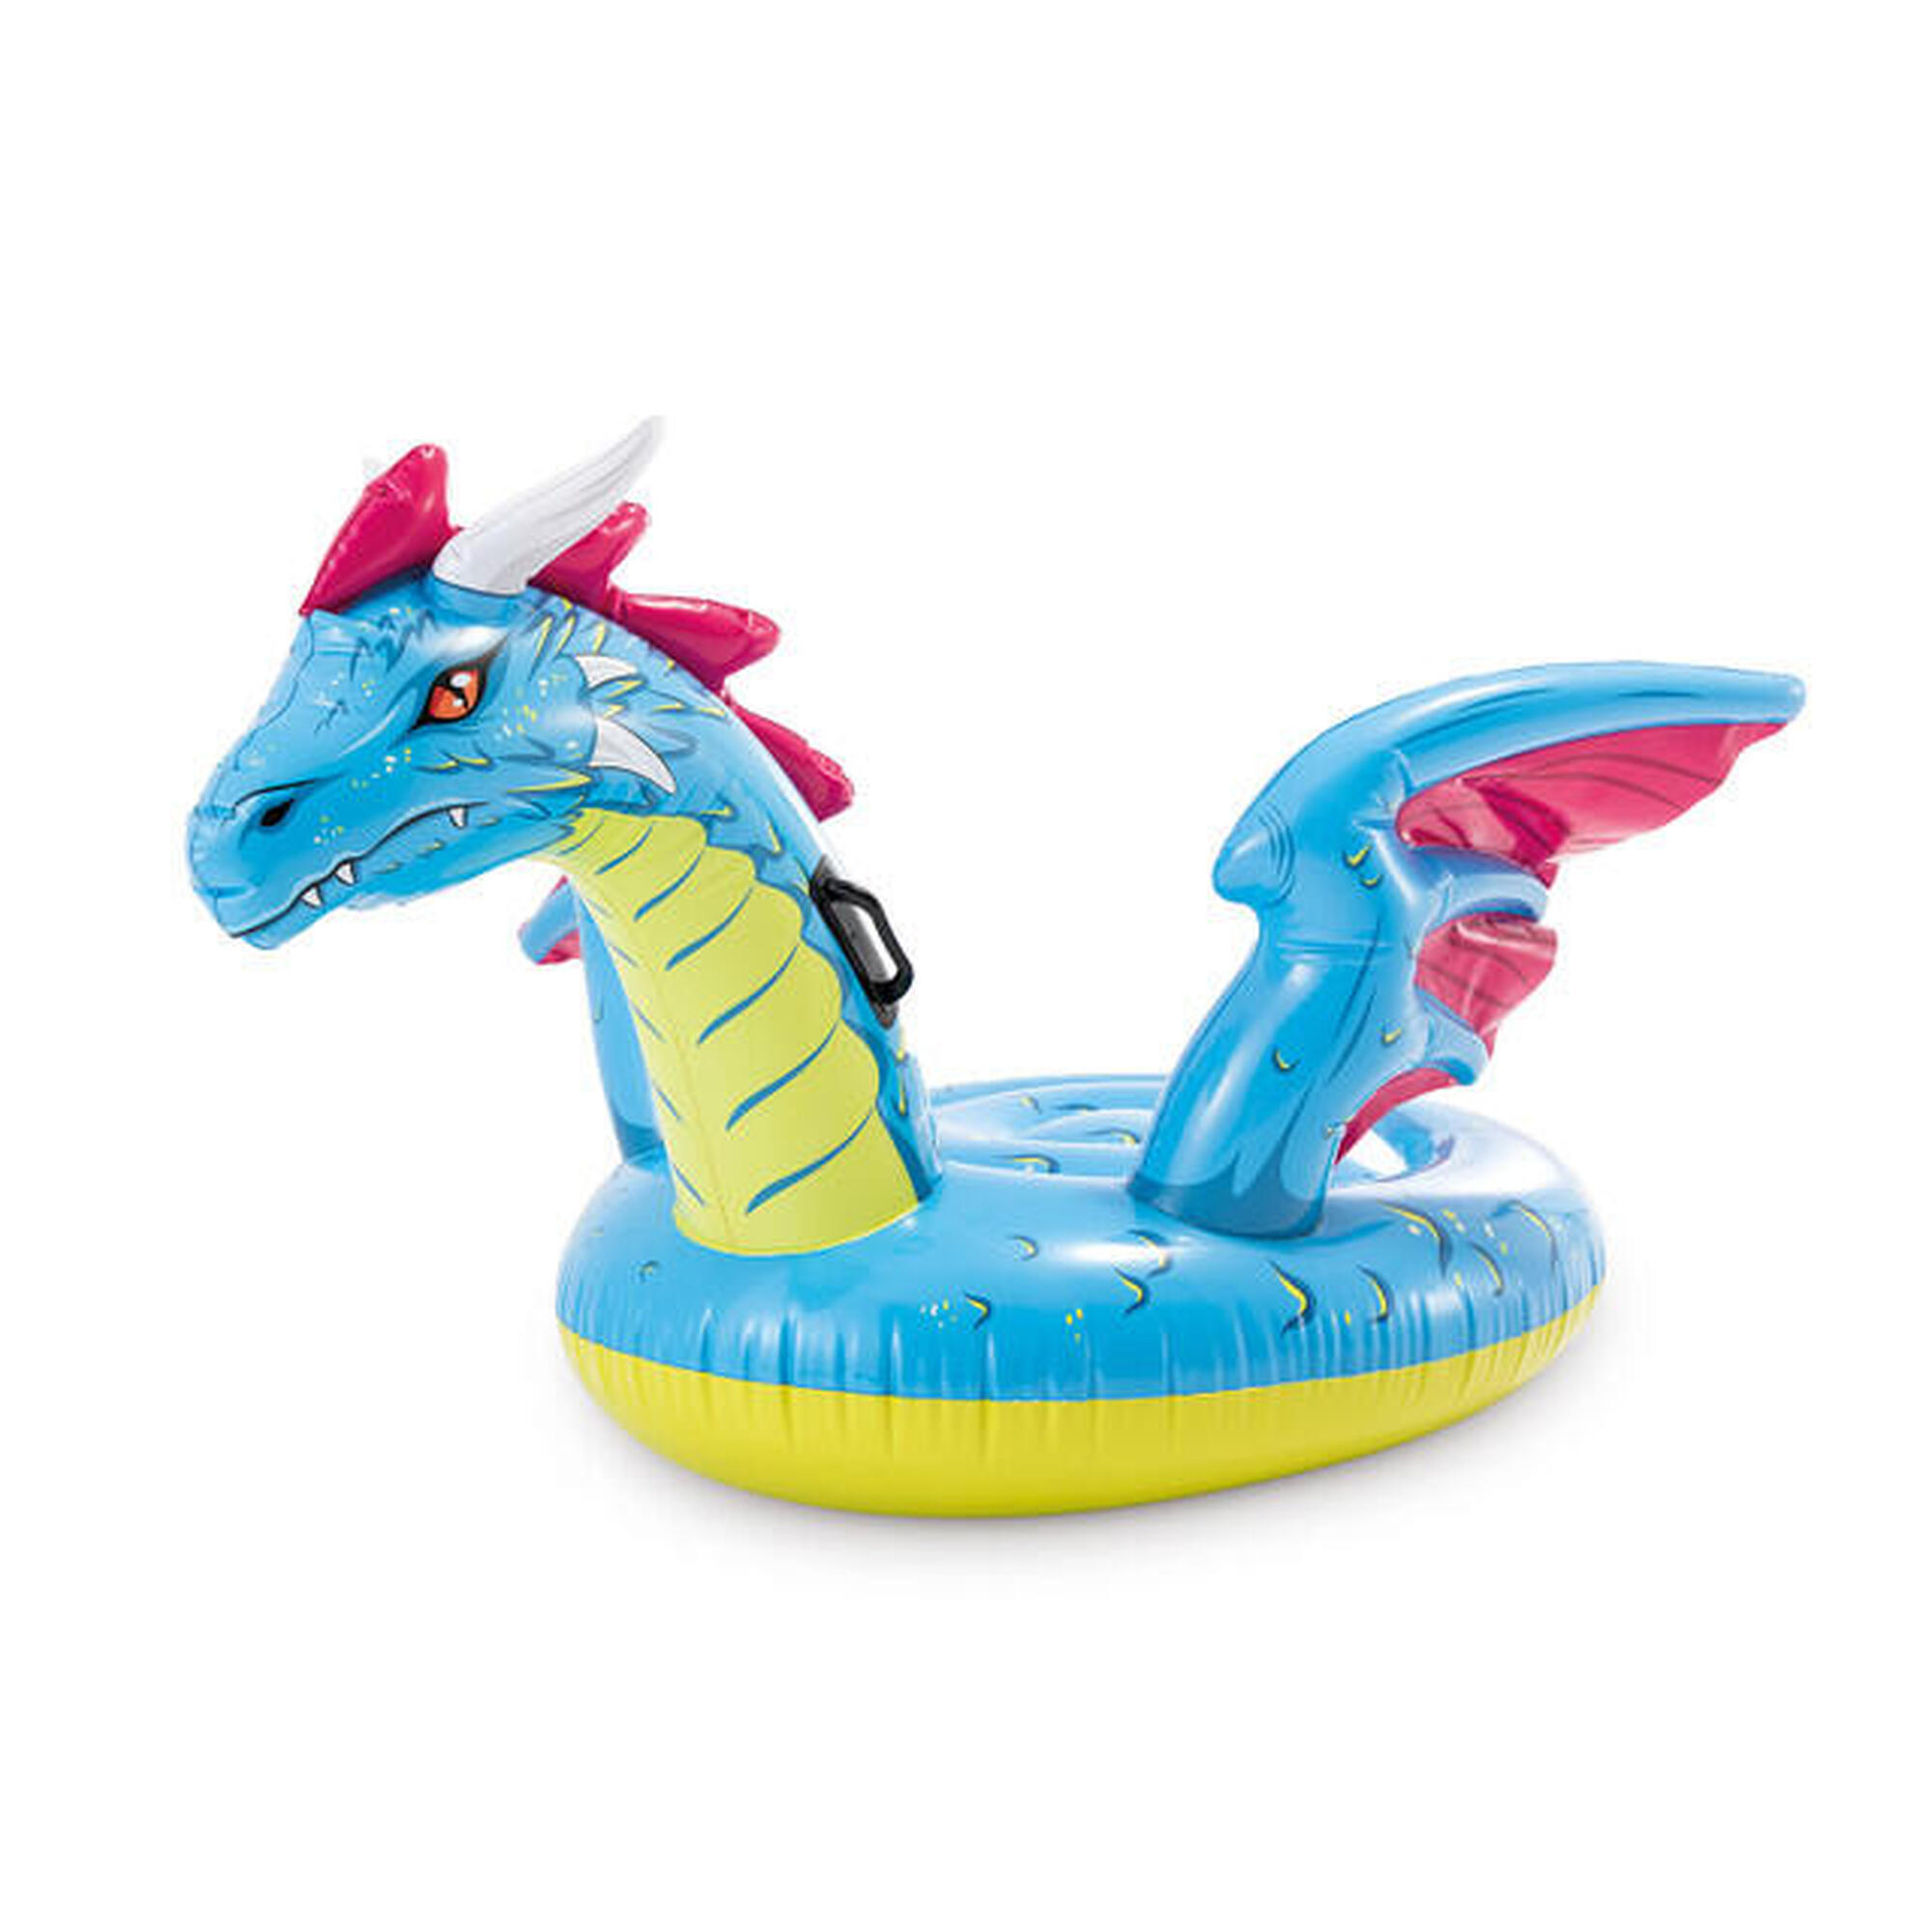 Dragon Ride-On Inflatable Pool Float - Blue